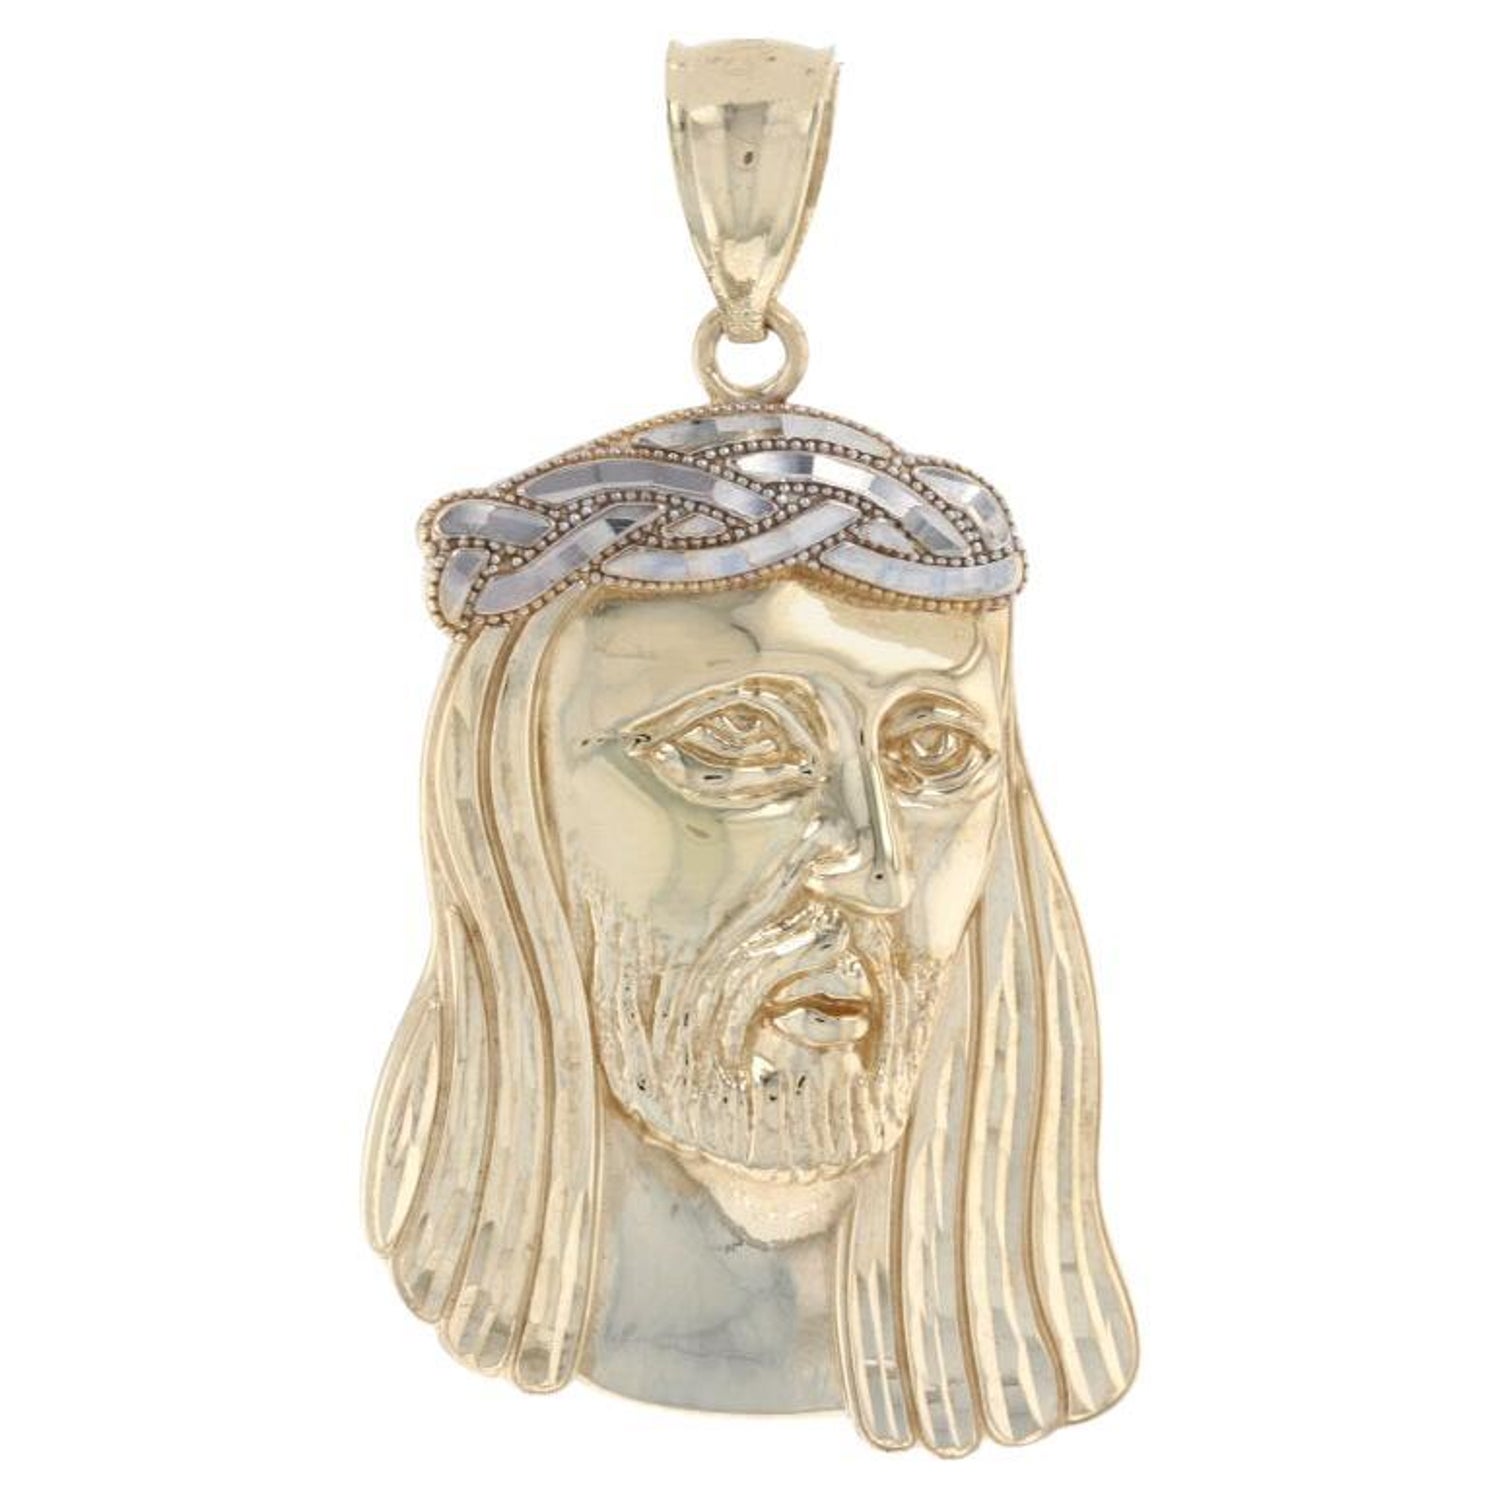 Details about   14K Two Tone Gold Religious Charm Jesus Face Pendant For Necklace or Chain 